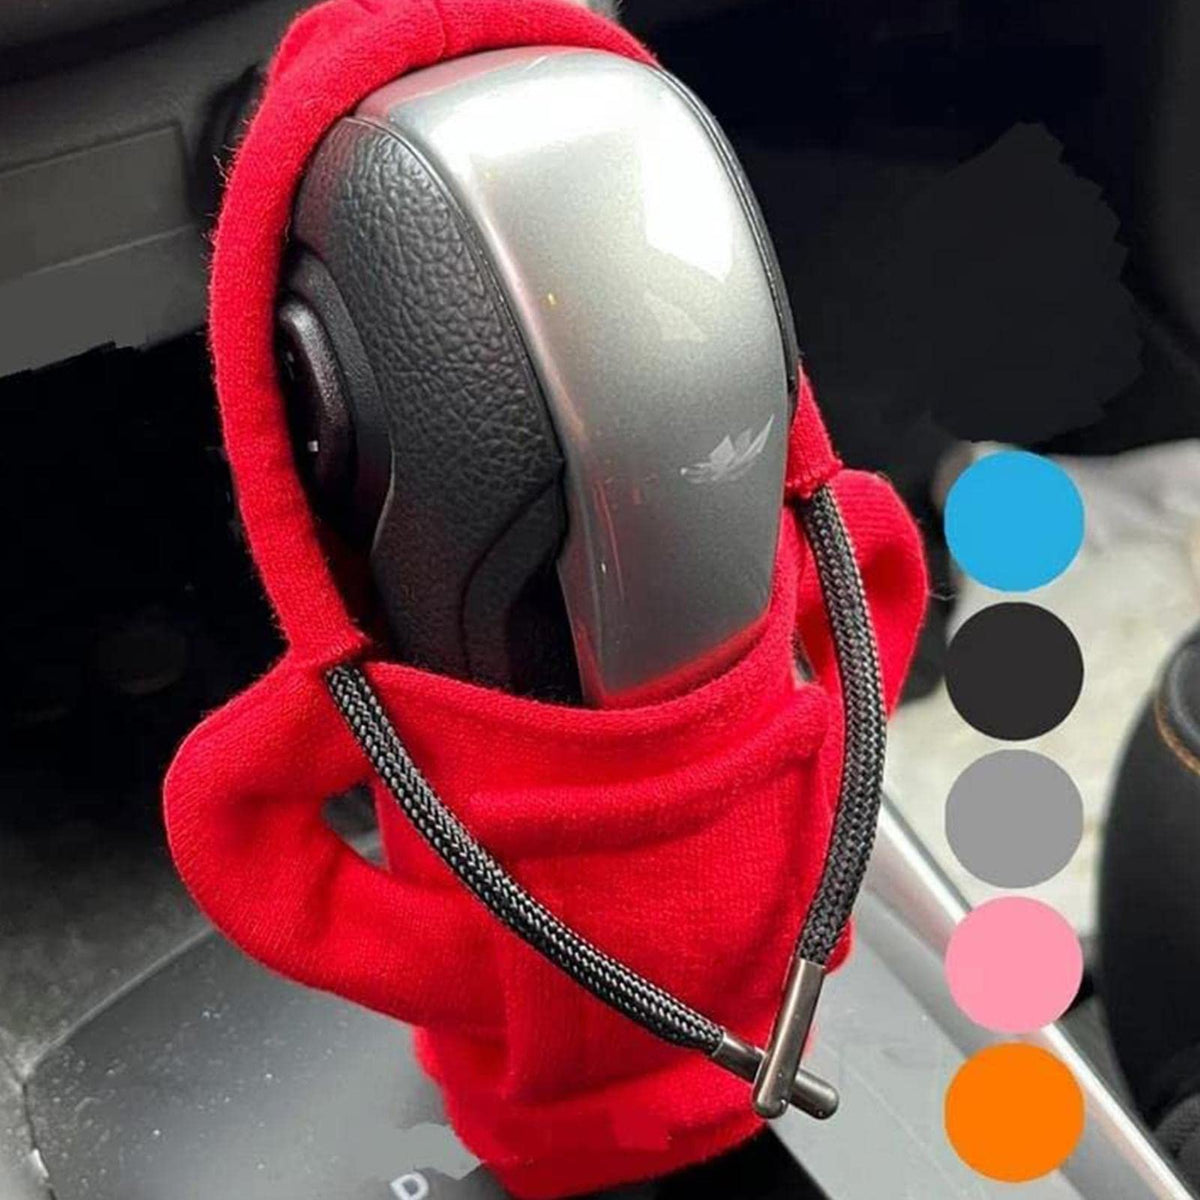 Car Gear Shift Cover | Gear Handle Knob Hoodie Cover,Funny Gear Stick Protector Fits Manual or Automatic, Fits Manual or Automatic, Universal Car